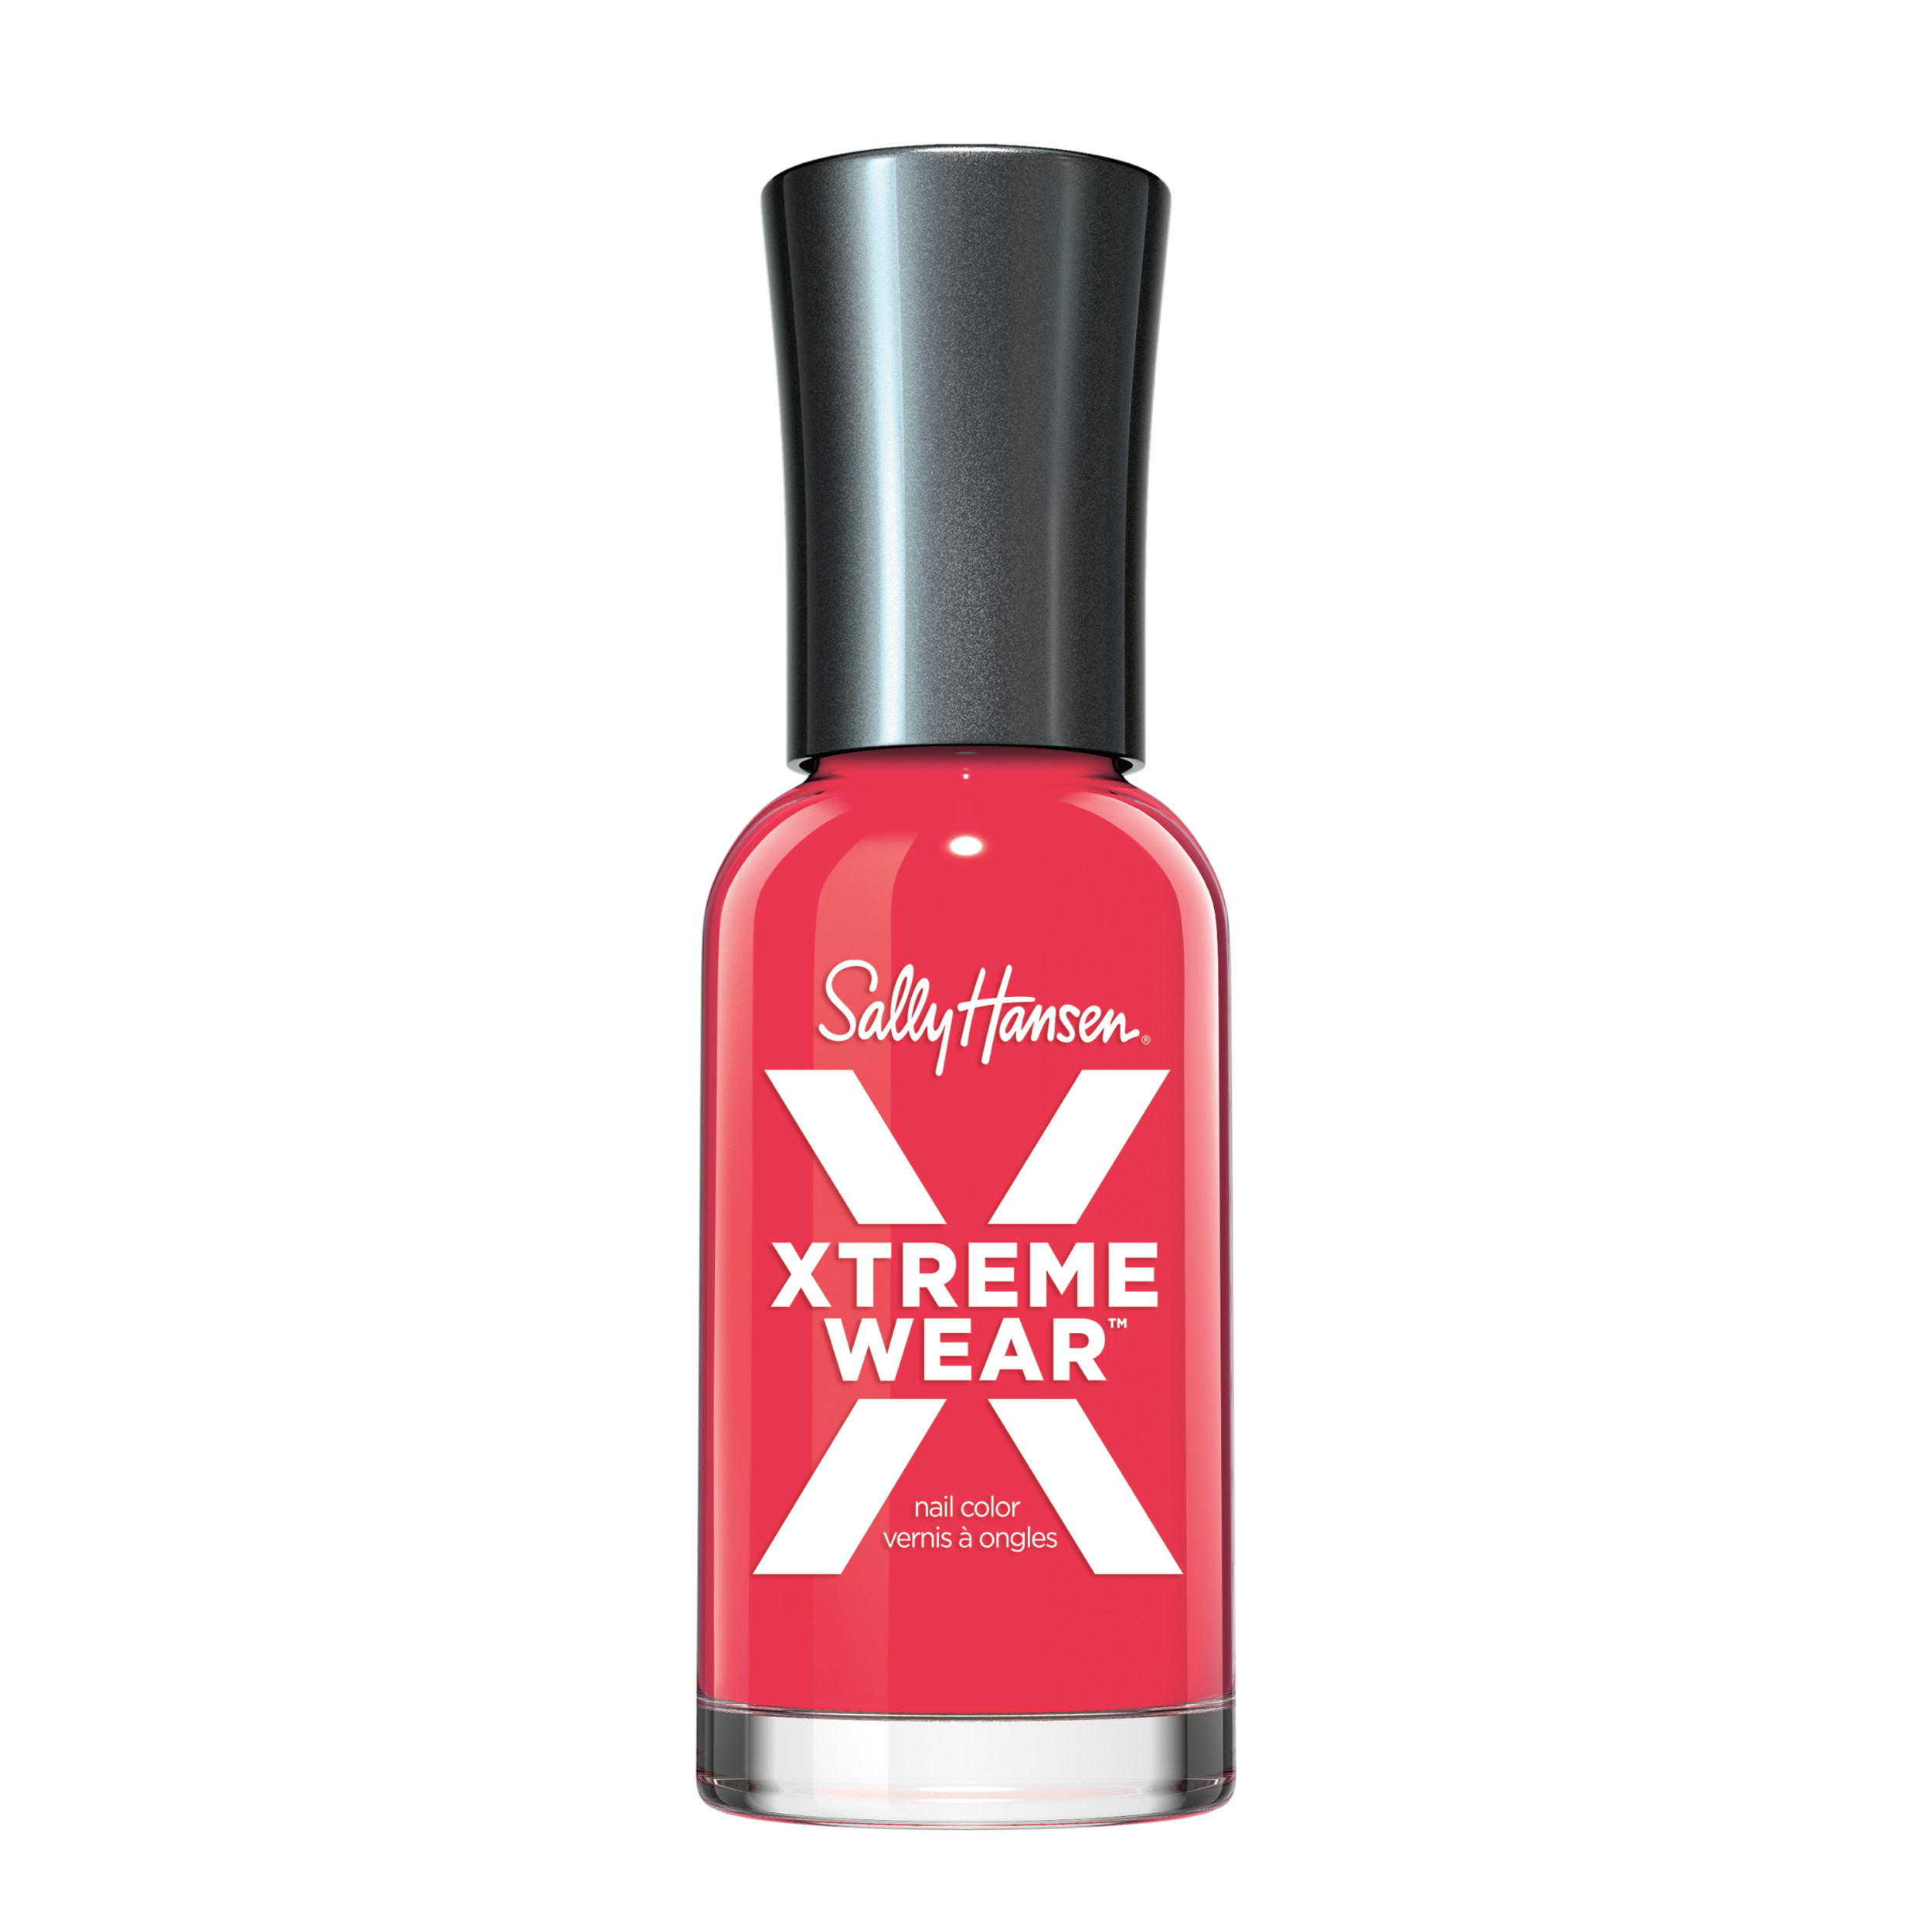 Sally Hansen Xtreme Wear Nail Color, Rebel Red, 0.4 oz, Color Nail Polish, Nail Polish, Quick Dry Nail Polish, Nail Polish Colors, Chip Resistant, Bold Color - image 1 of 14